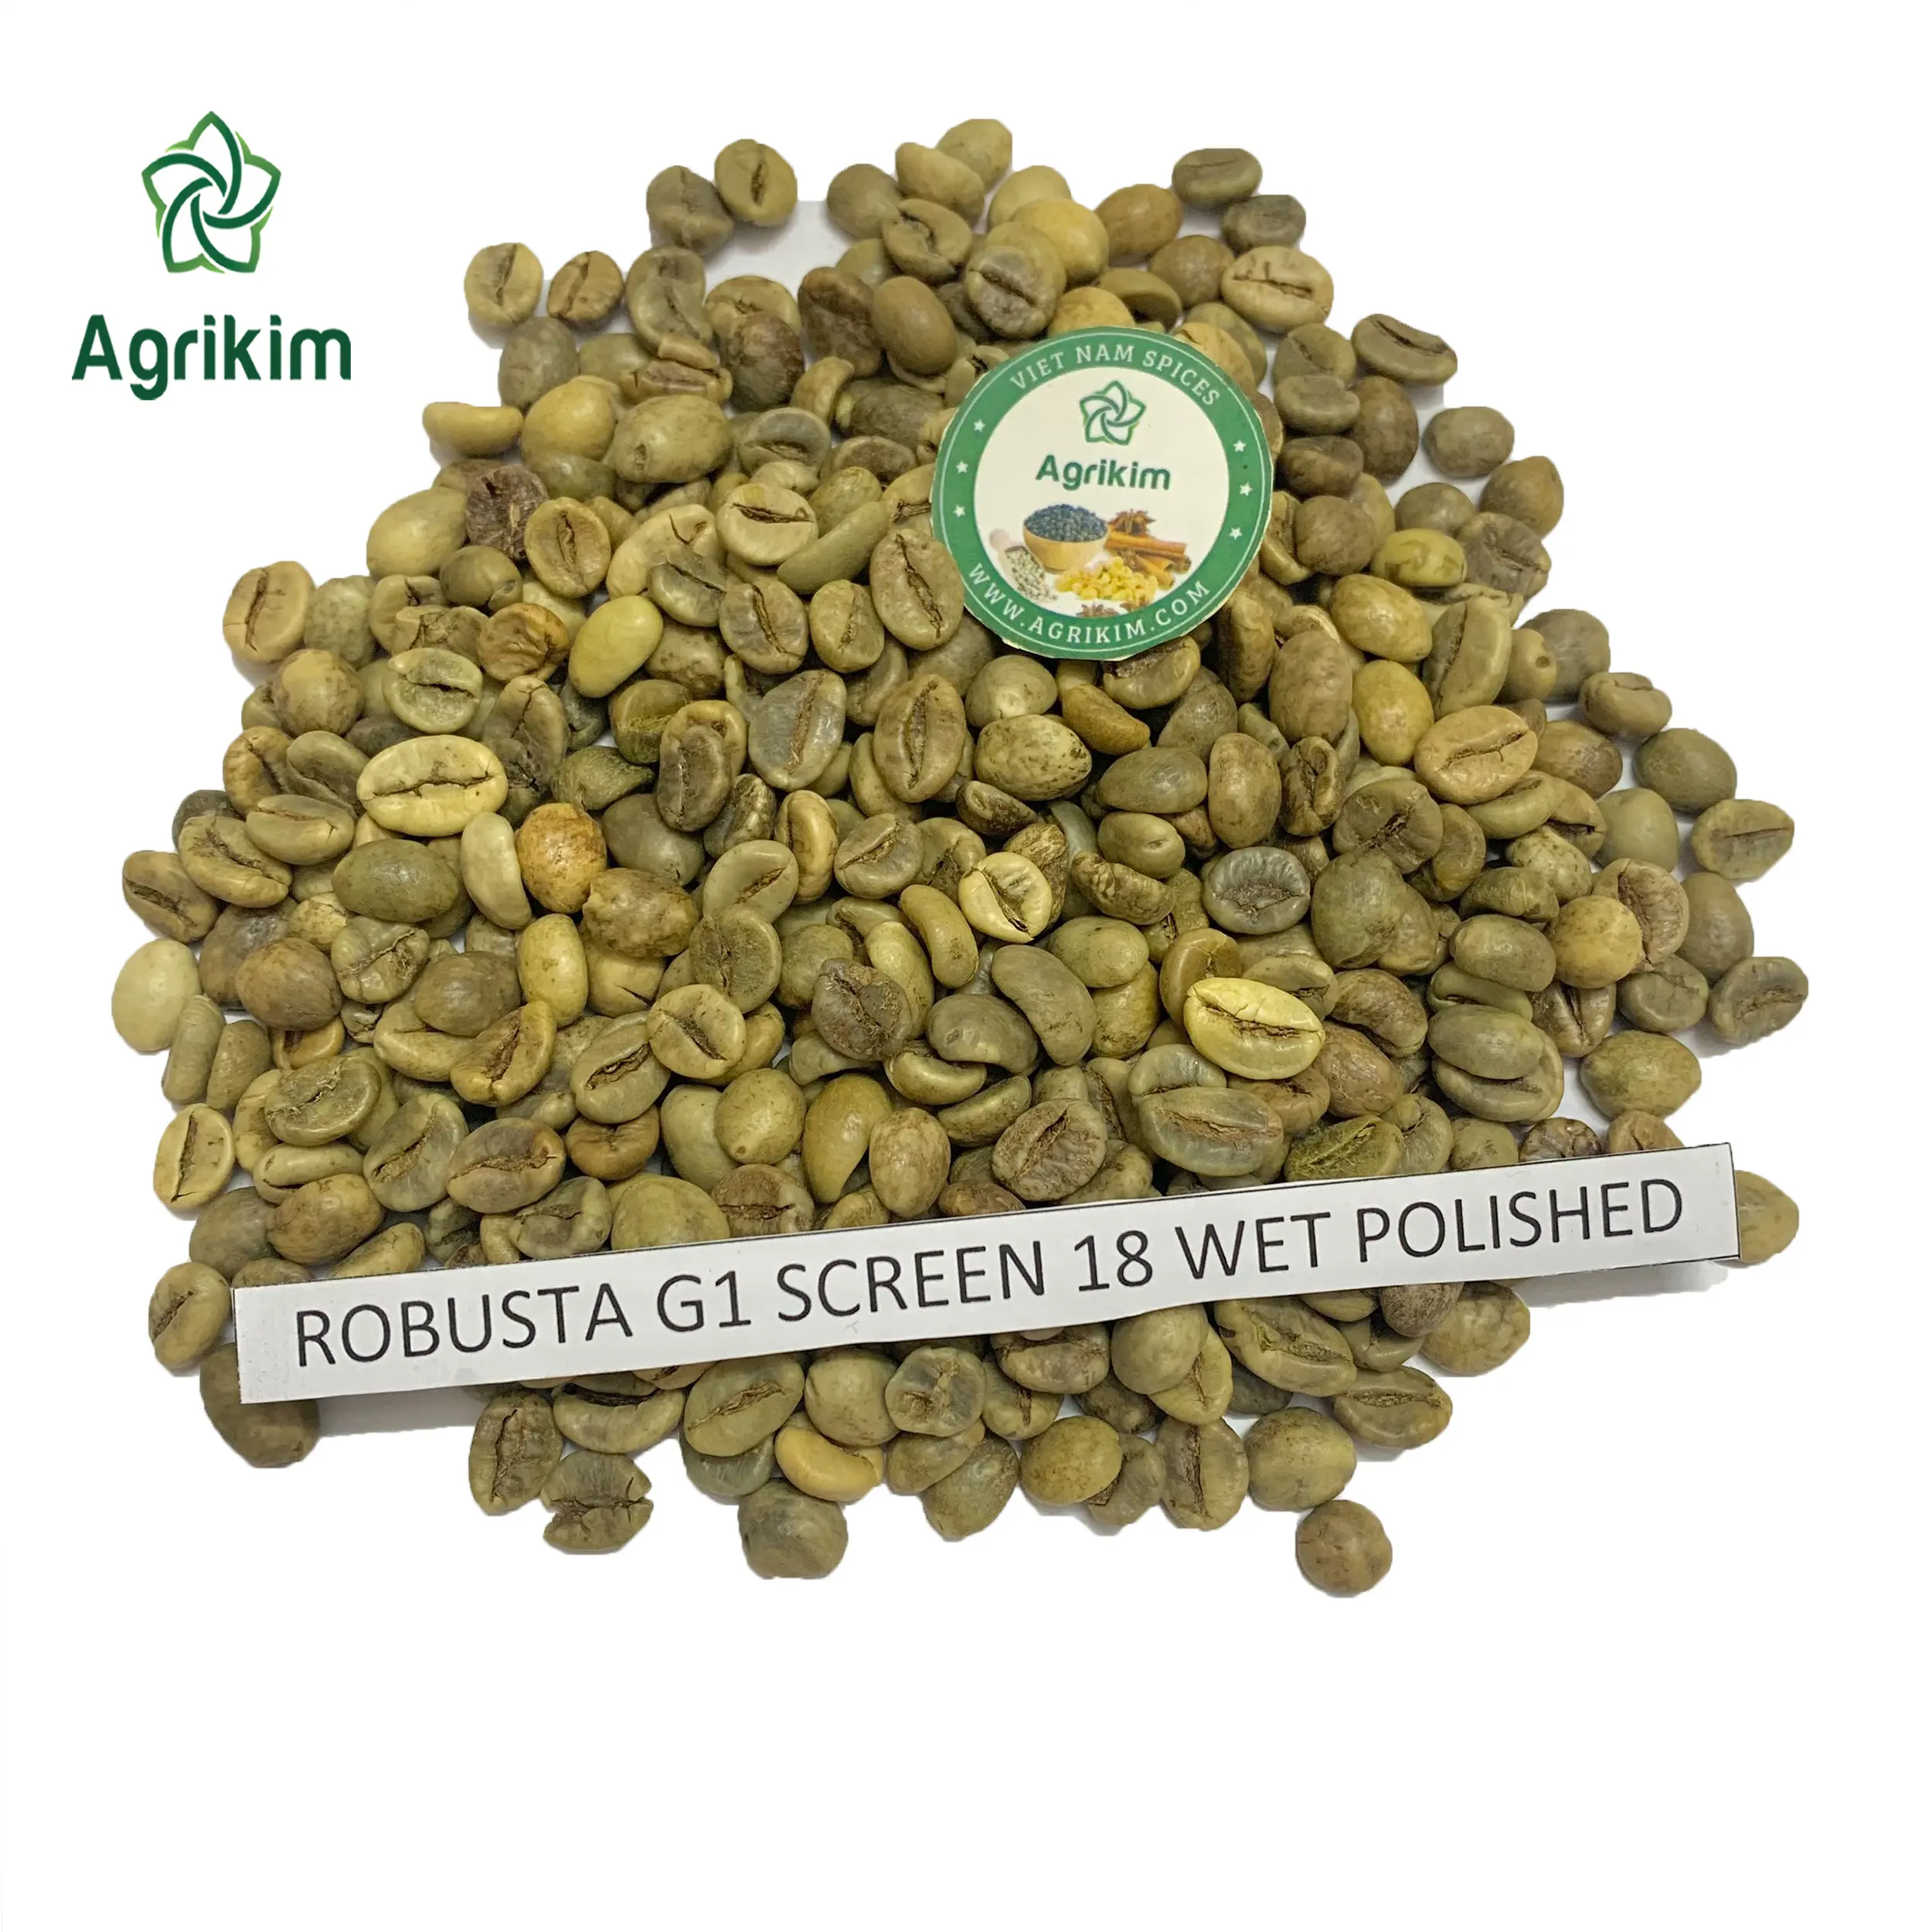 [free sample] Top quality for export of ROBUSTA GREEN COFFEE BEANS with the best price from reliable supplier +84363565928